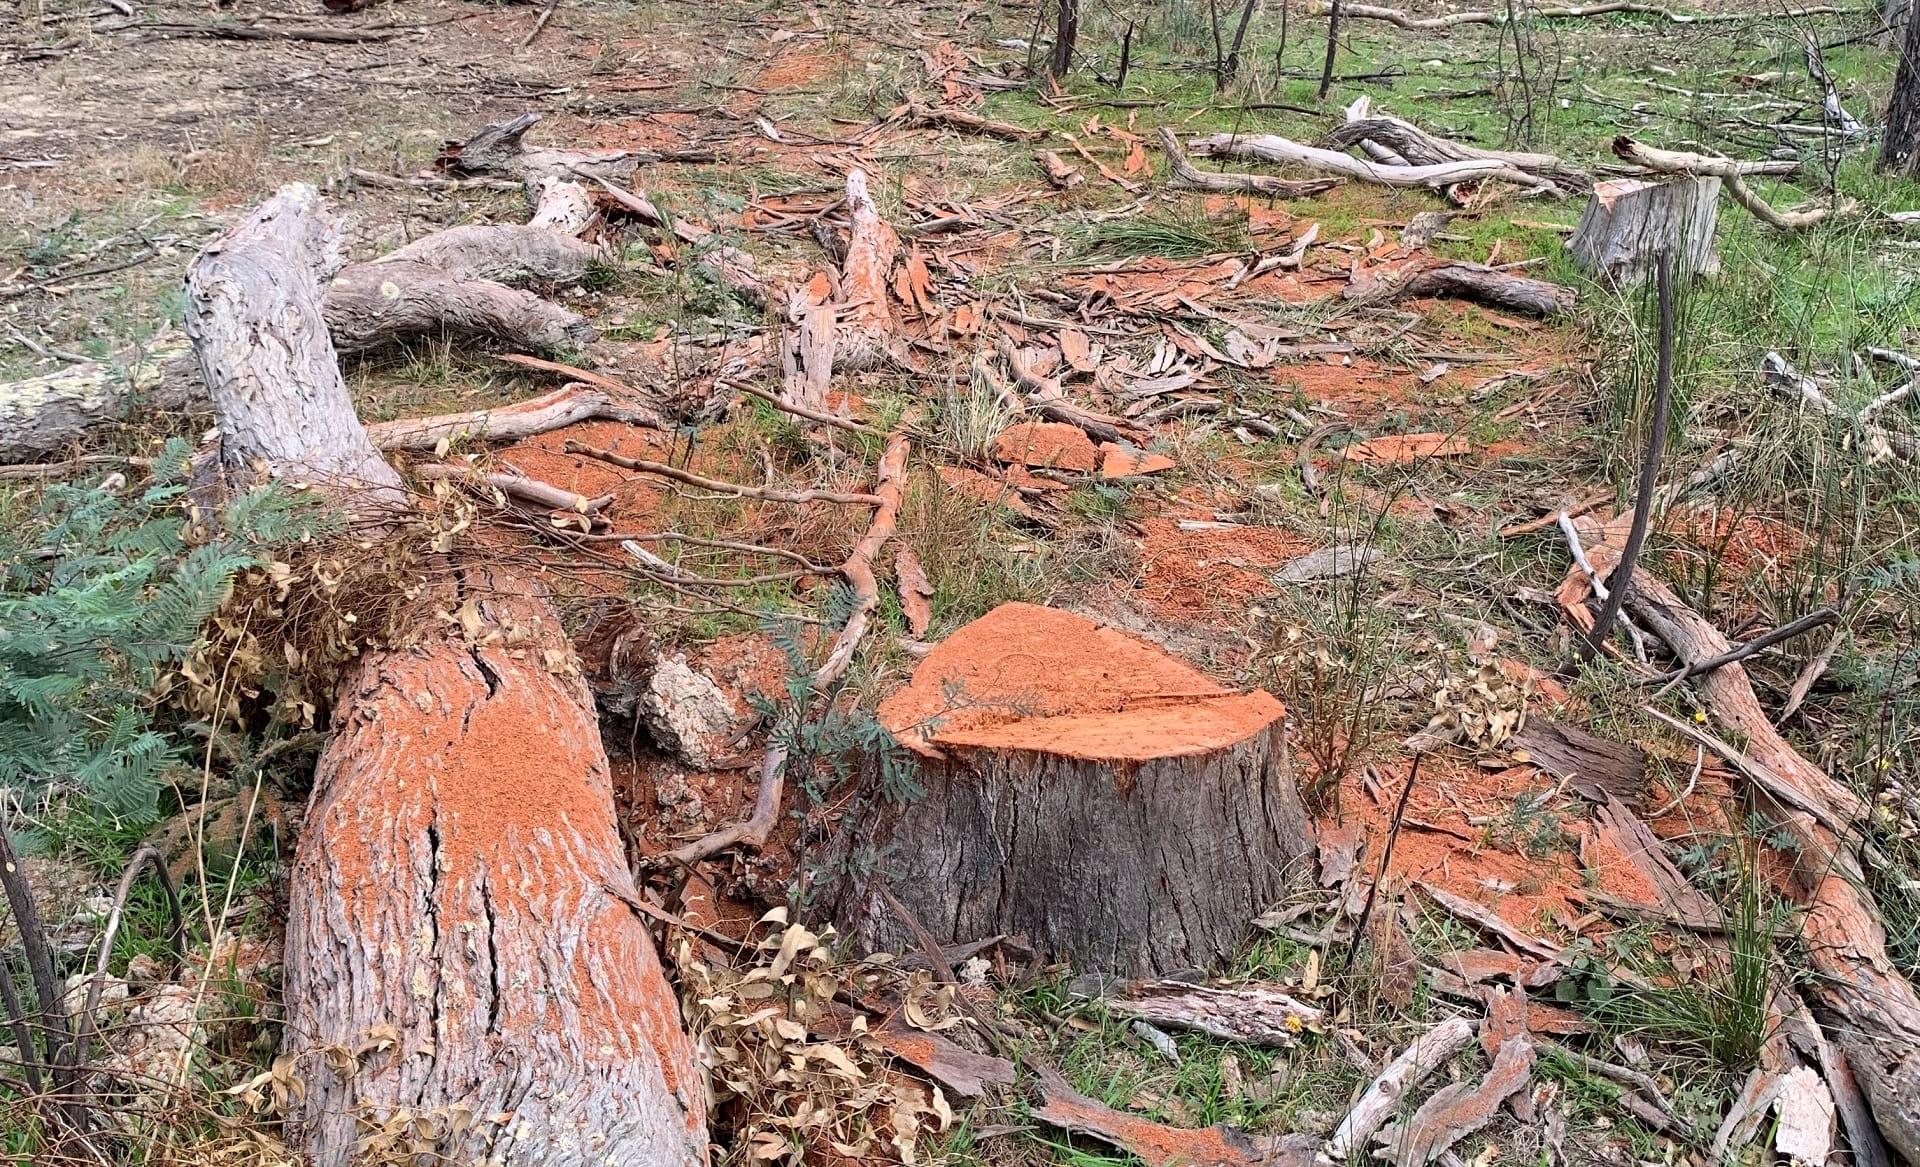 Further habitat destruction discovered by Authorised Officers within Gunbower National Park